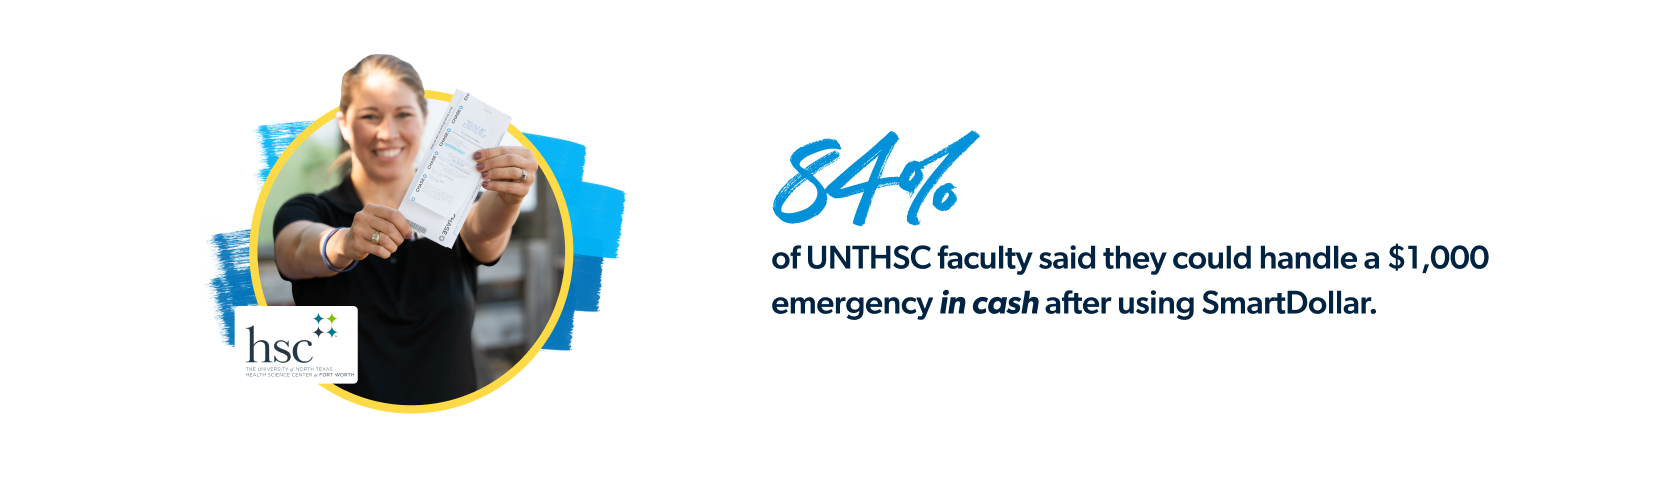 84% of UNTHSC faculty said they could handle a $1,000 emergency in cash after using SmartDollar. 